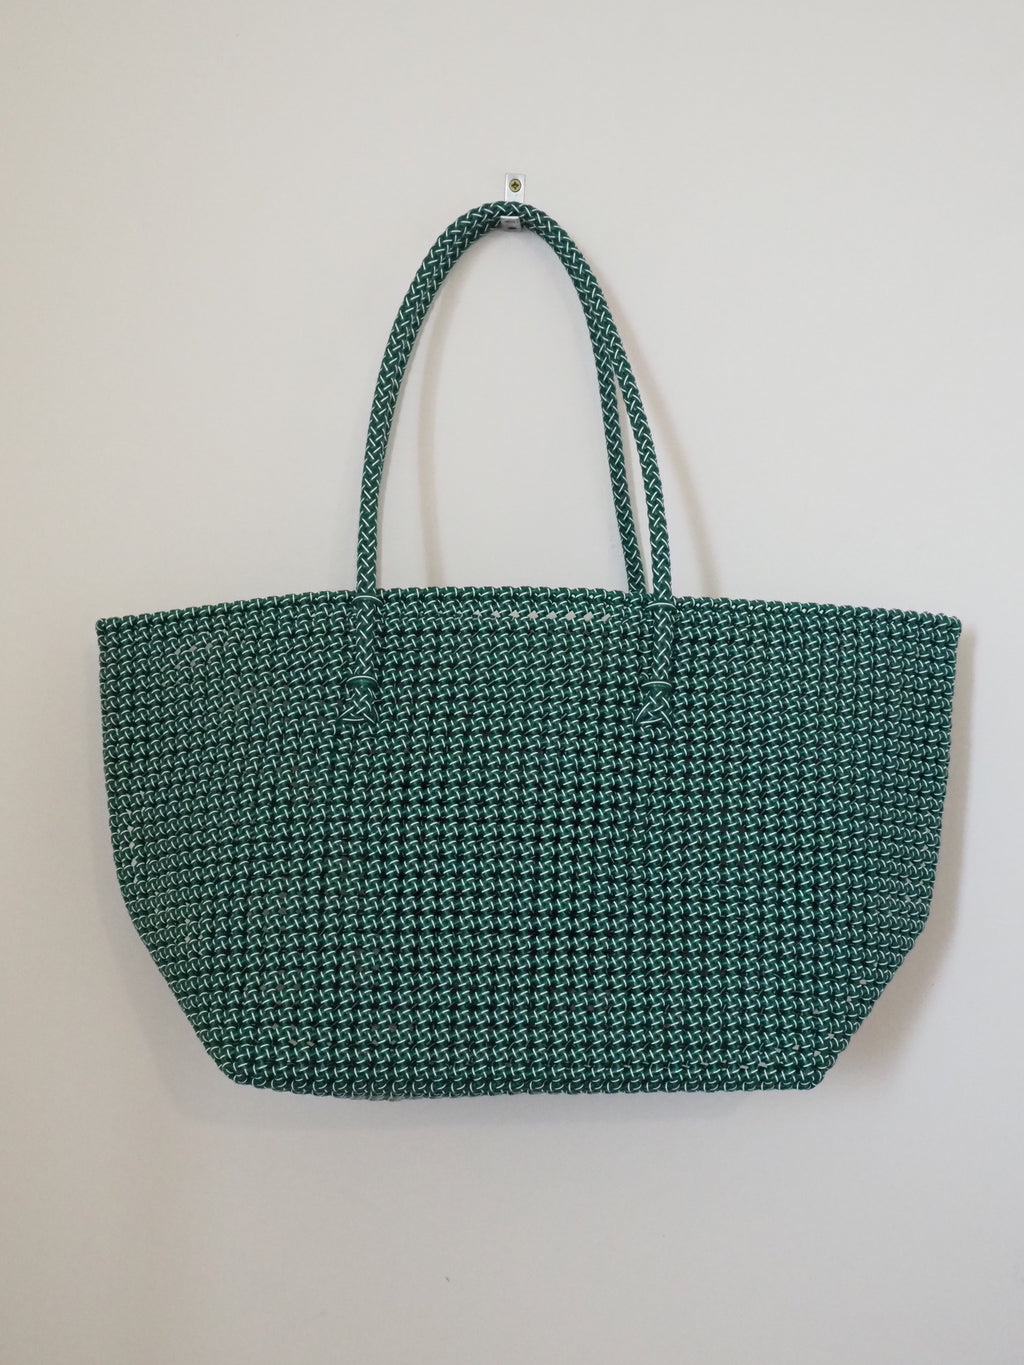 Hand made shopping basket- Two tone White + green